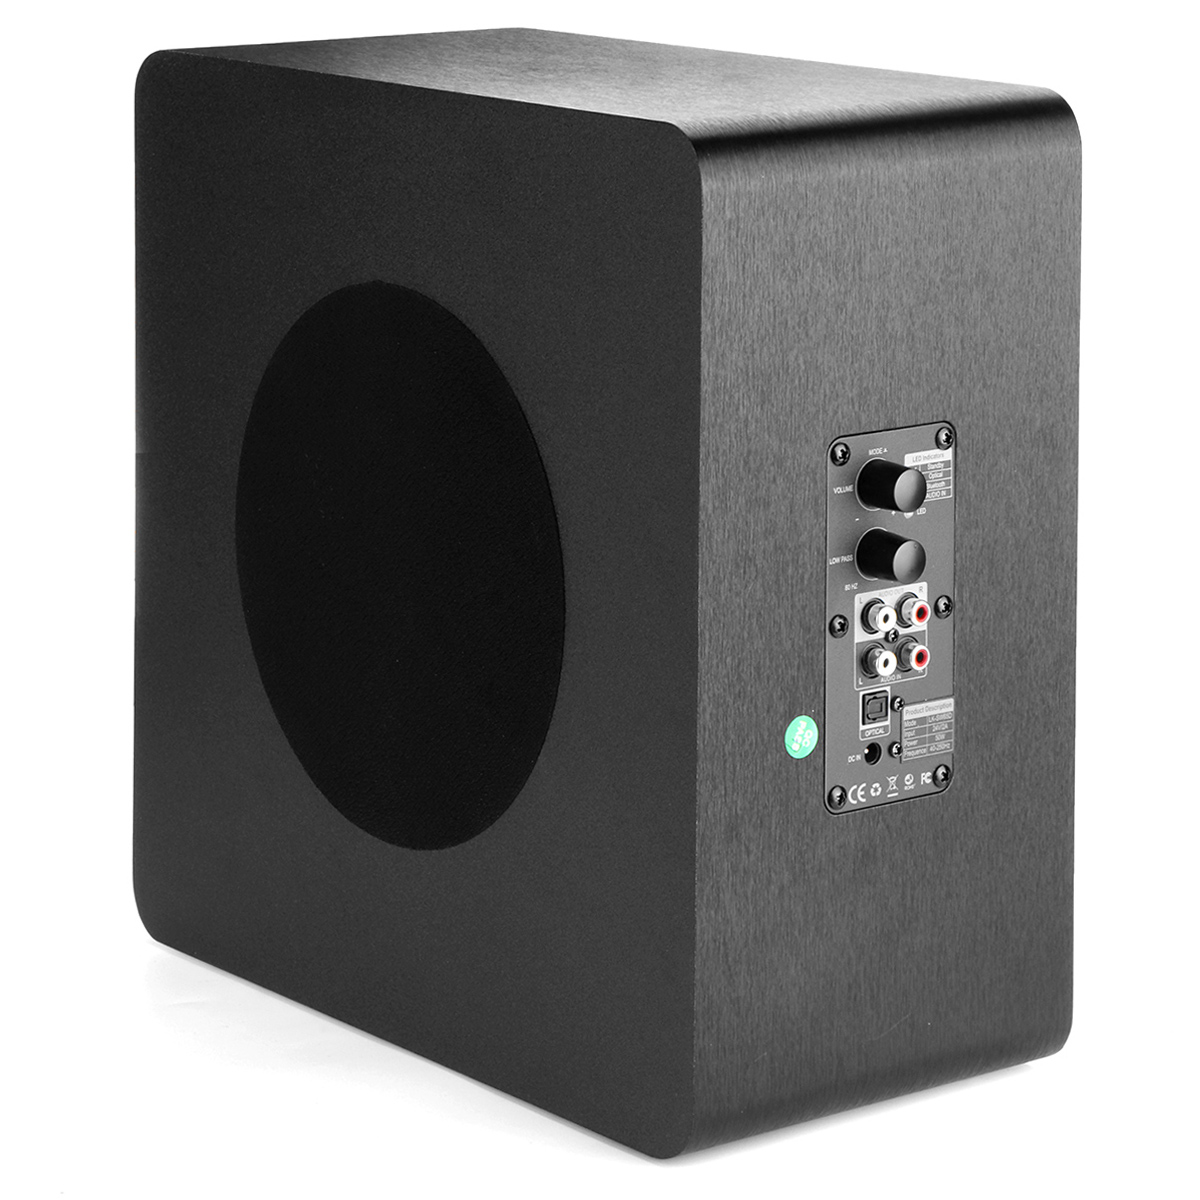 Find LK SW65D 6 5 inch 60W Powered bluetooth Subwoofer Compact Speaker Deep Base Built in Amplifier Home Audio Theater for TV Optical RCA for Sale on Gipsybee.com with cryptocurrencies